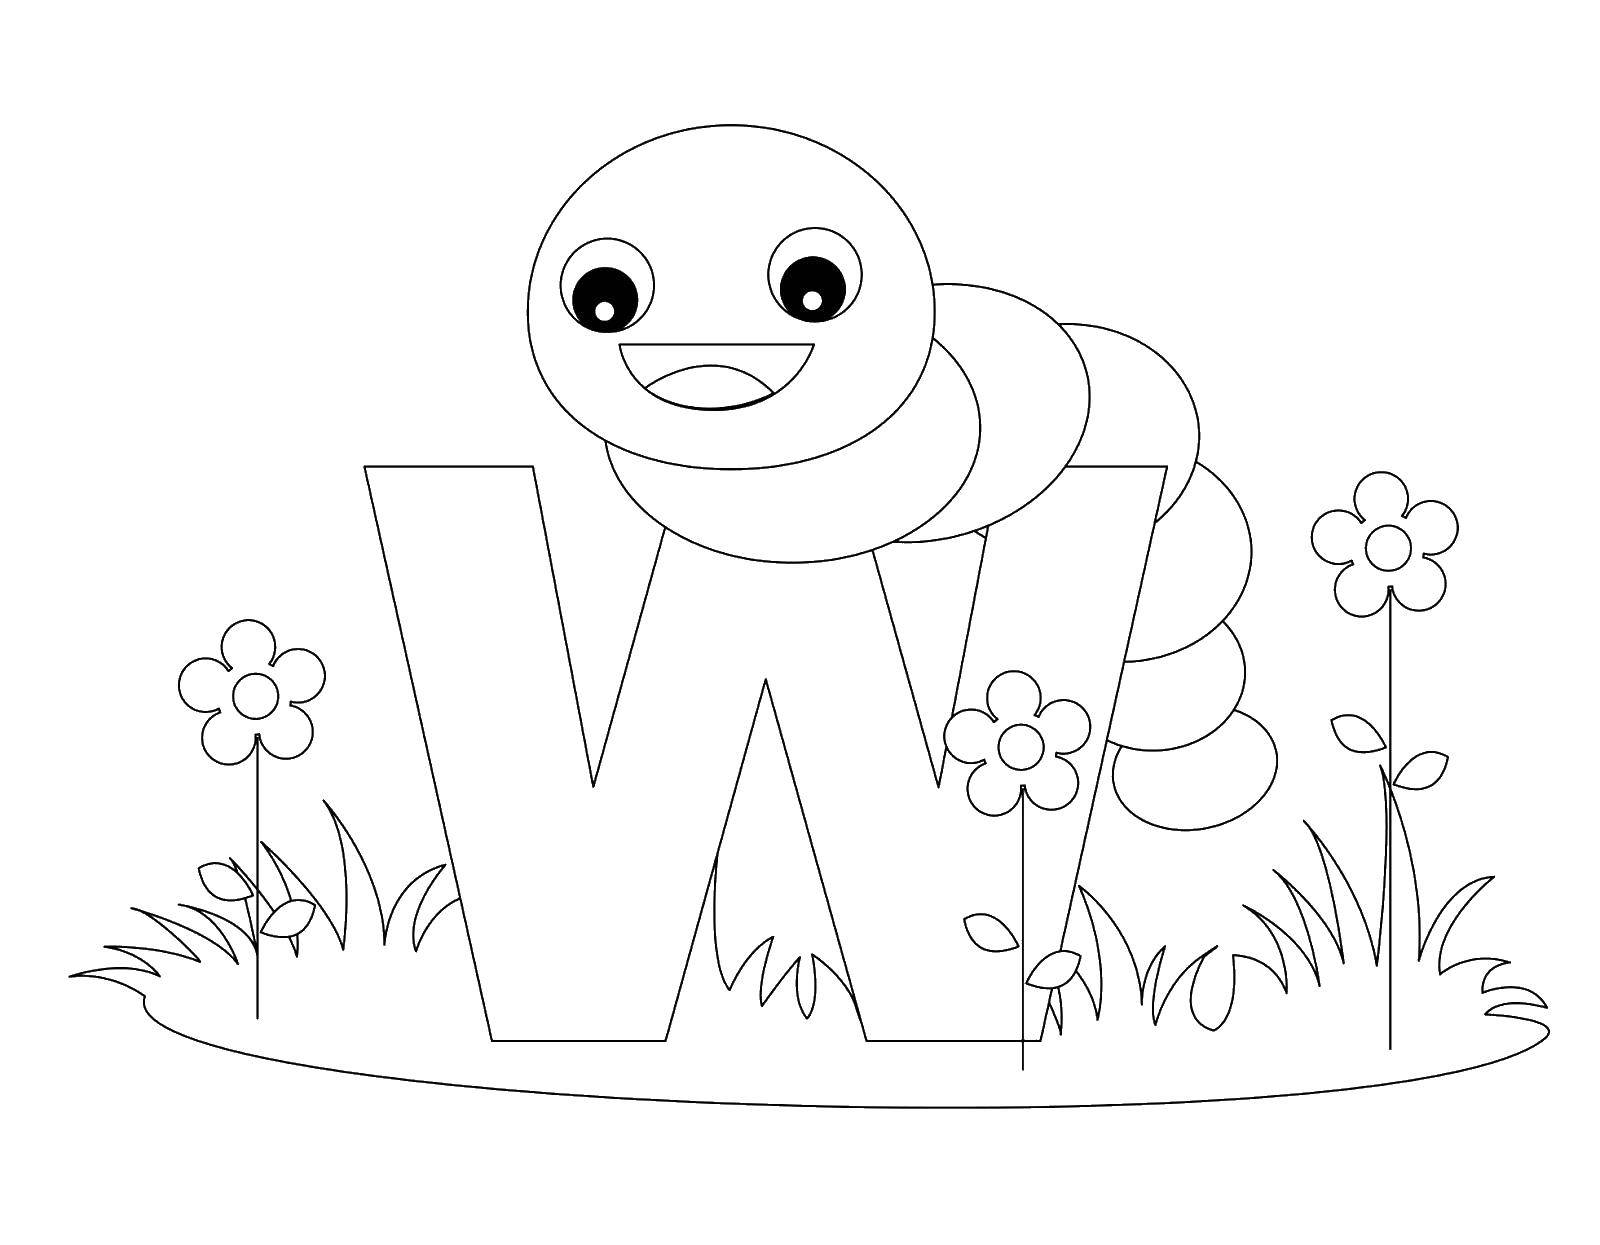 Coloring The worm h. Category English alphabet. Tags:  The alphabet, letters, words.